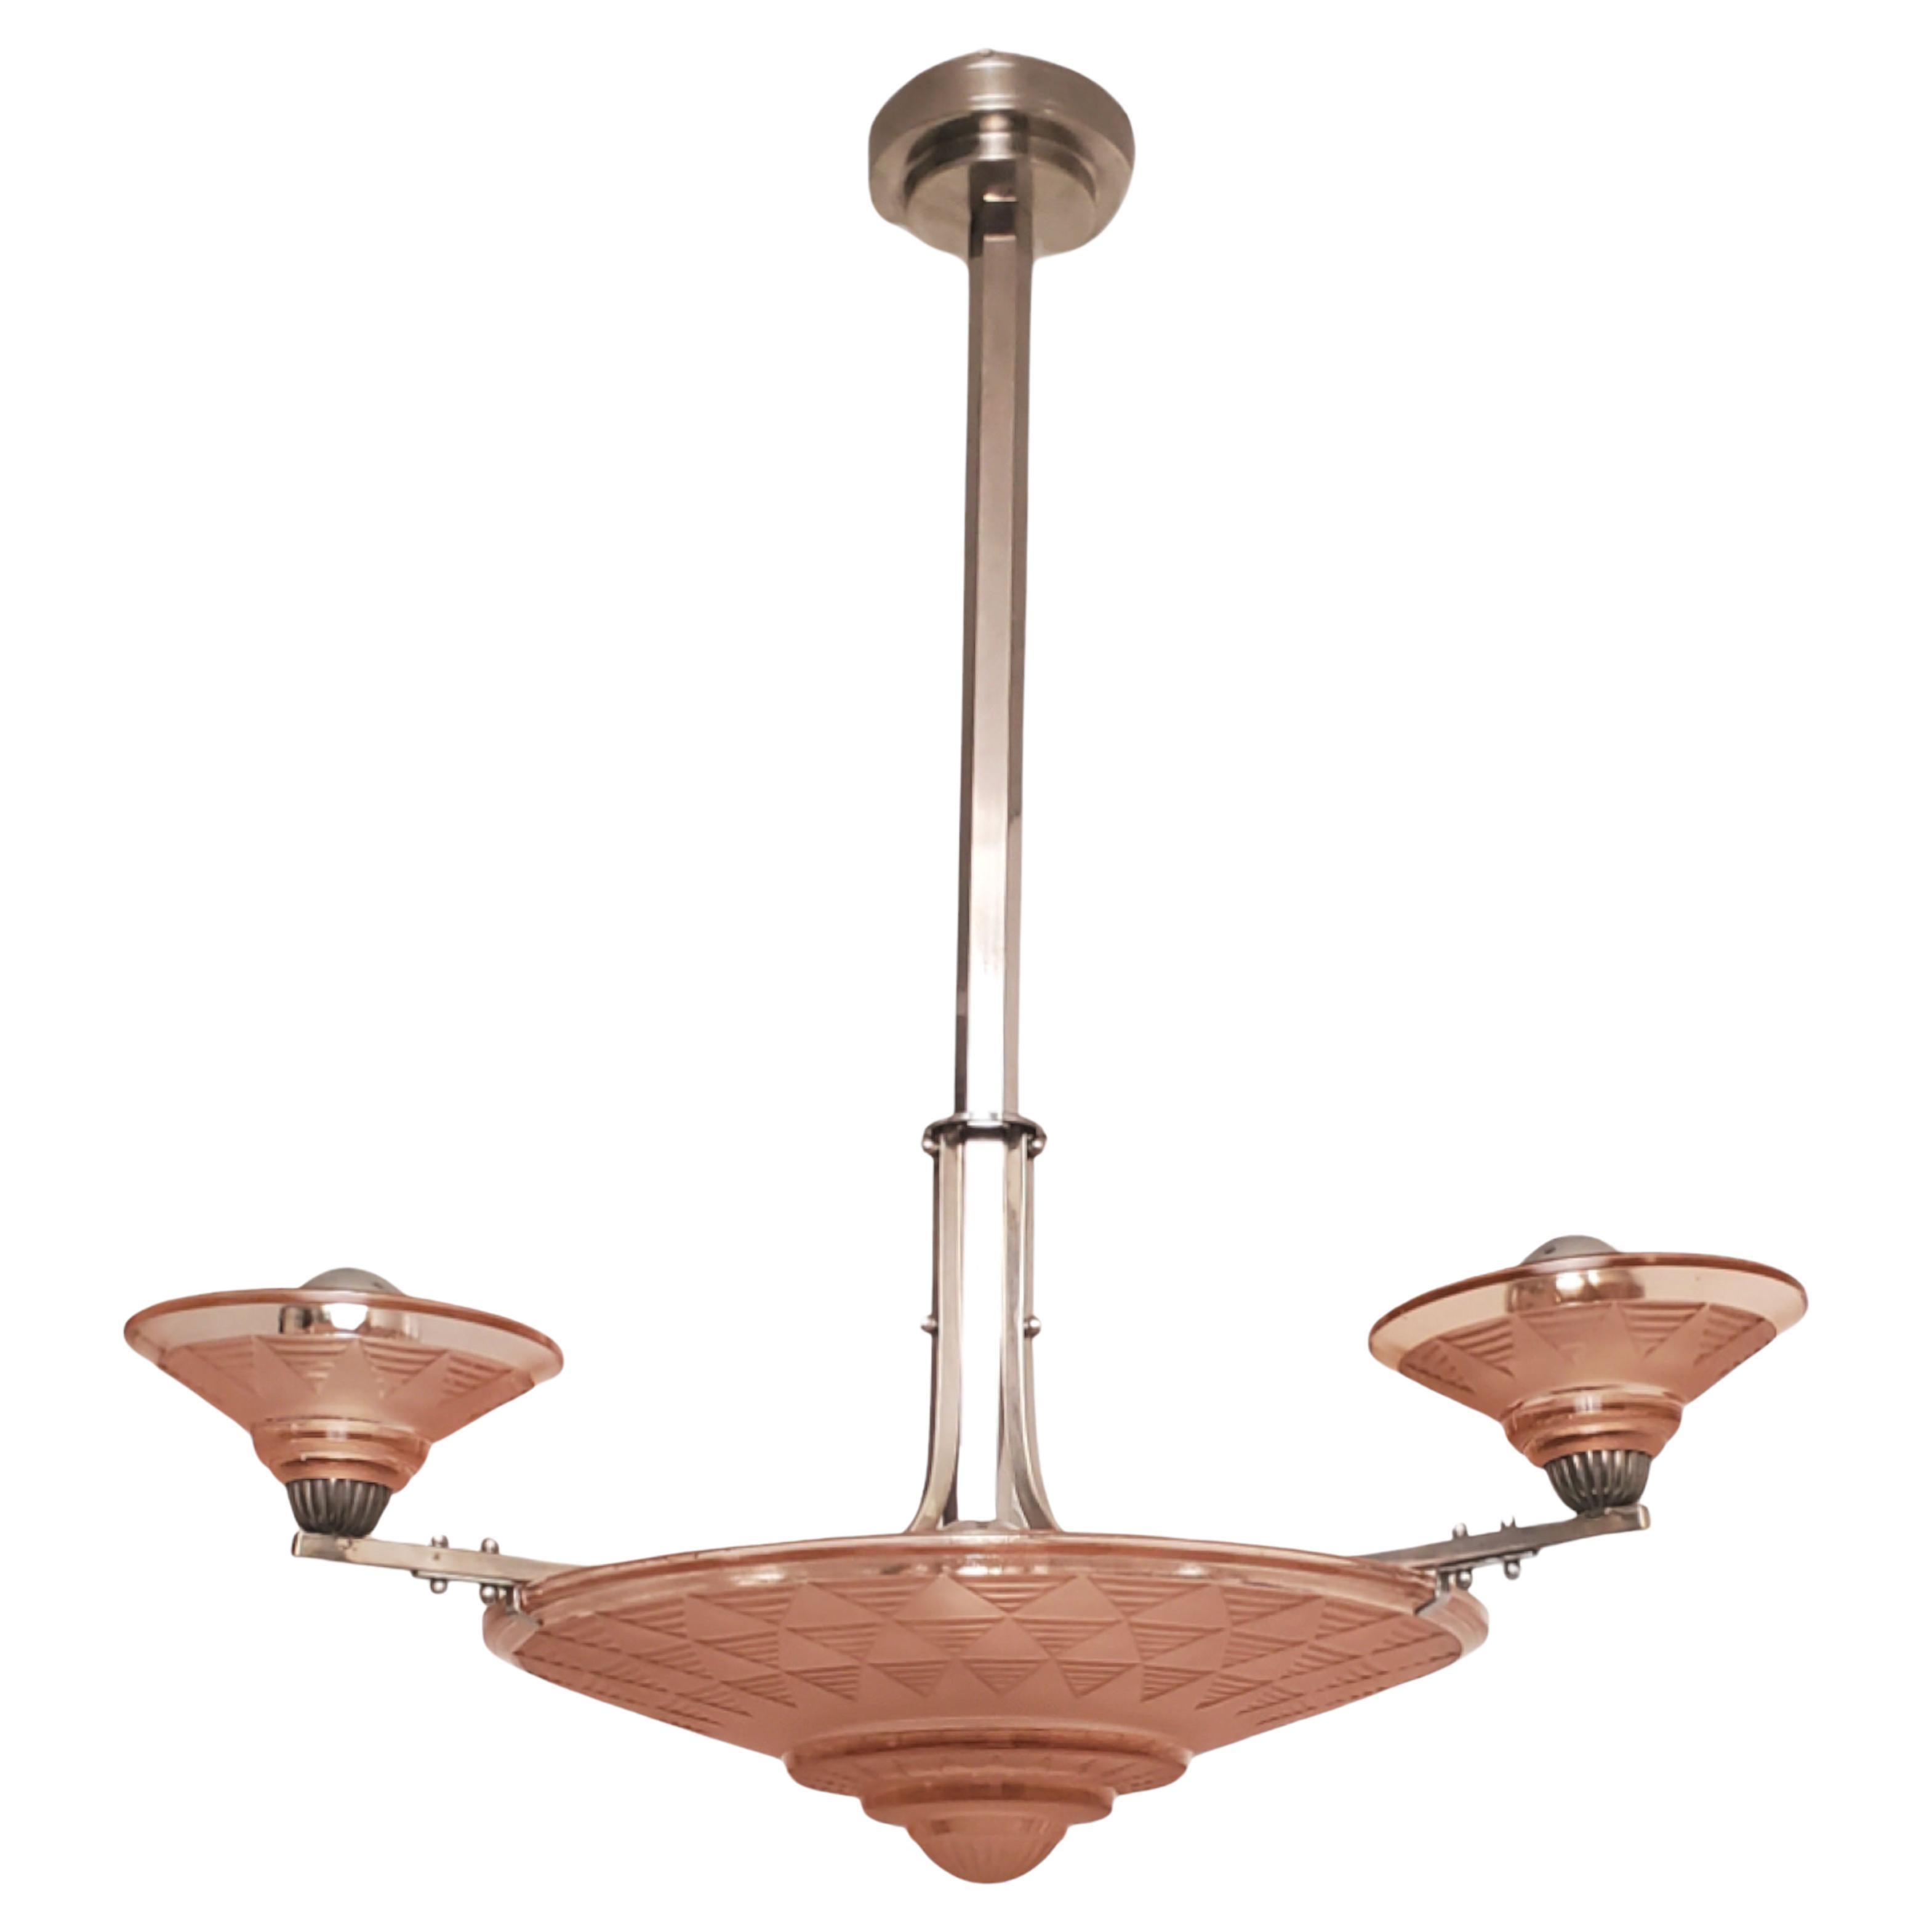 Petitot Art Deco peach /salmon /pink frosted glass + nickeled bronze chandelier